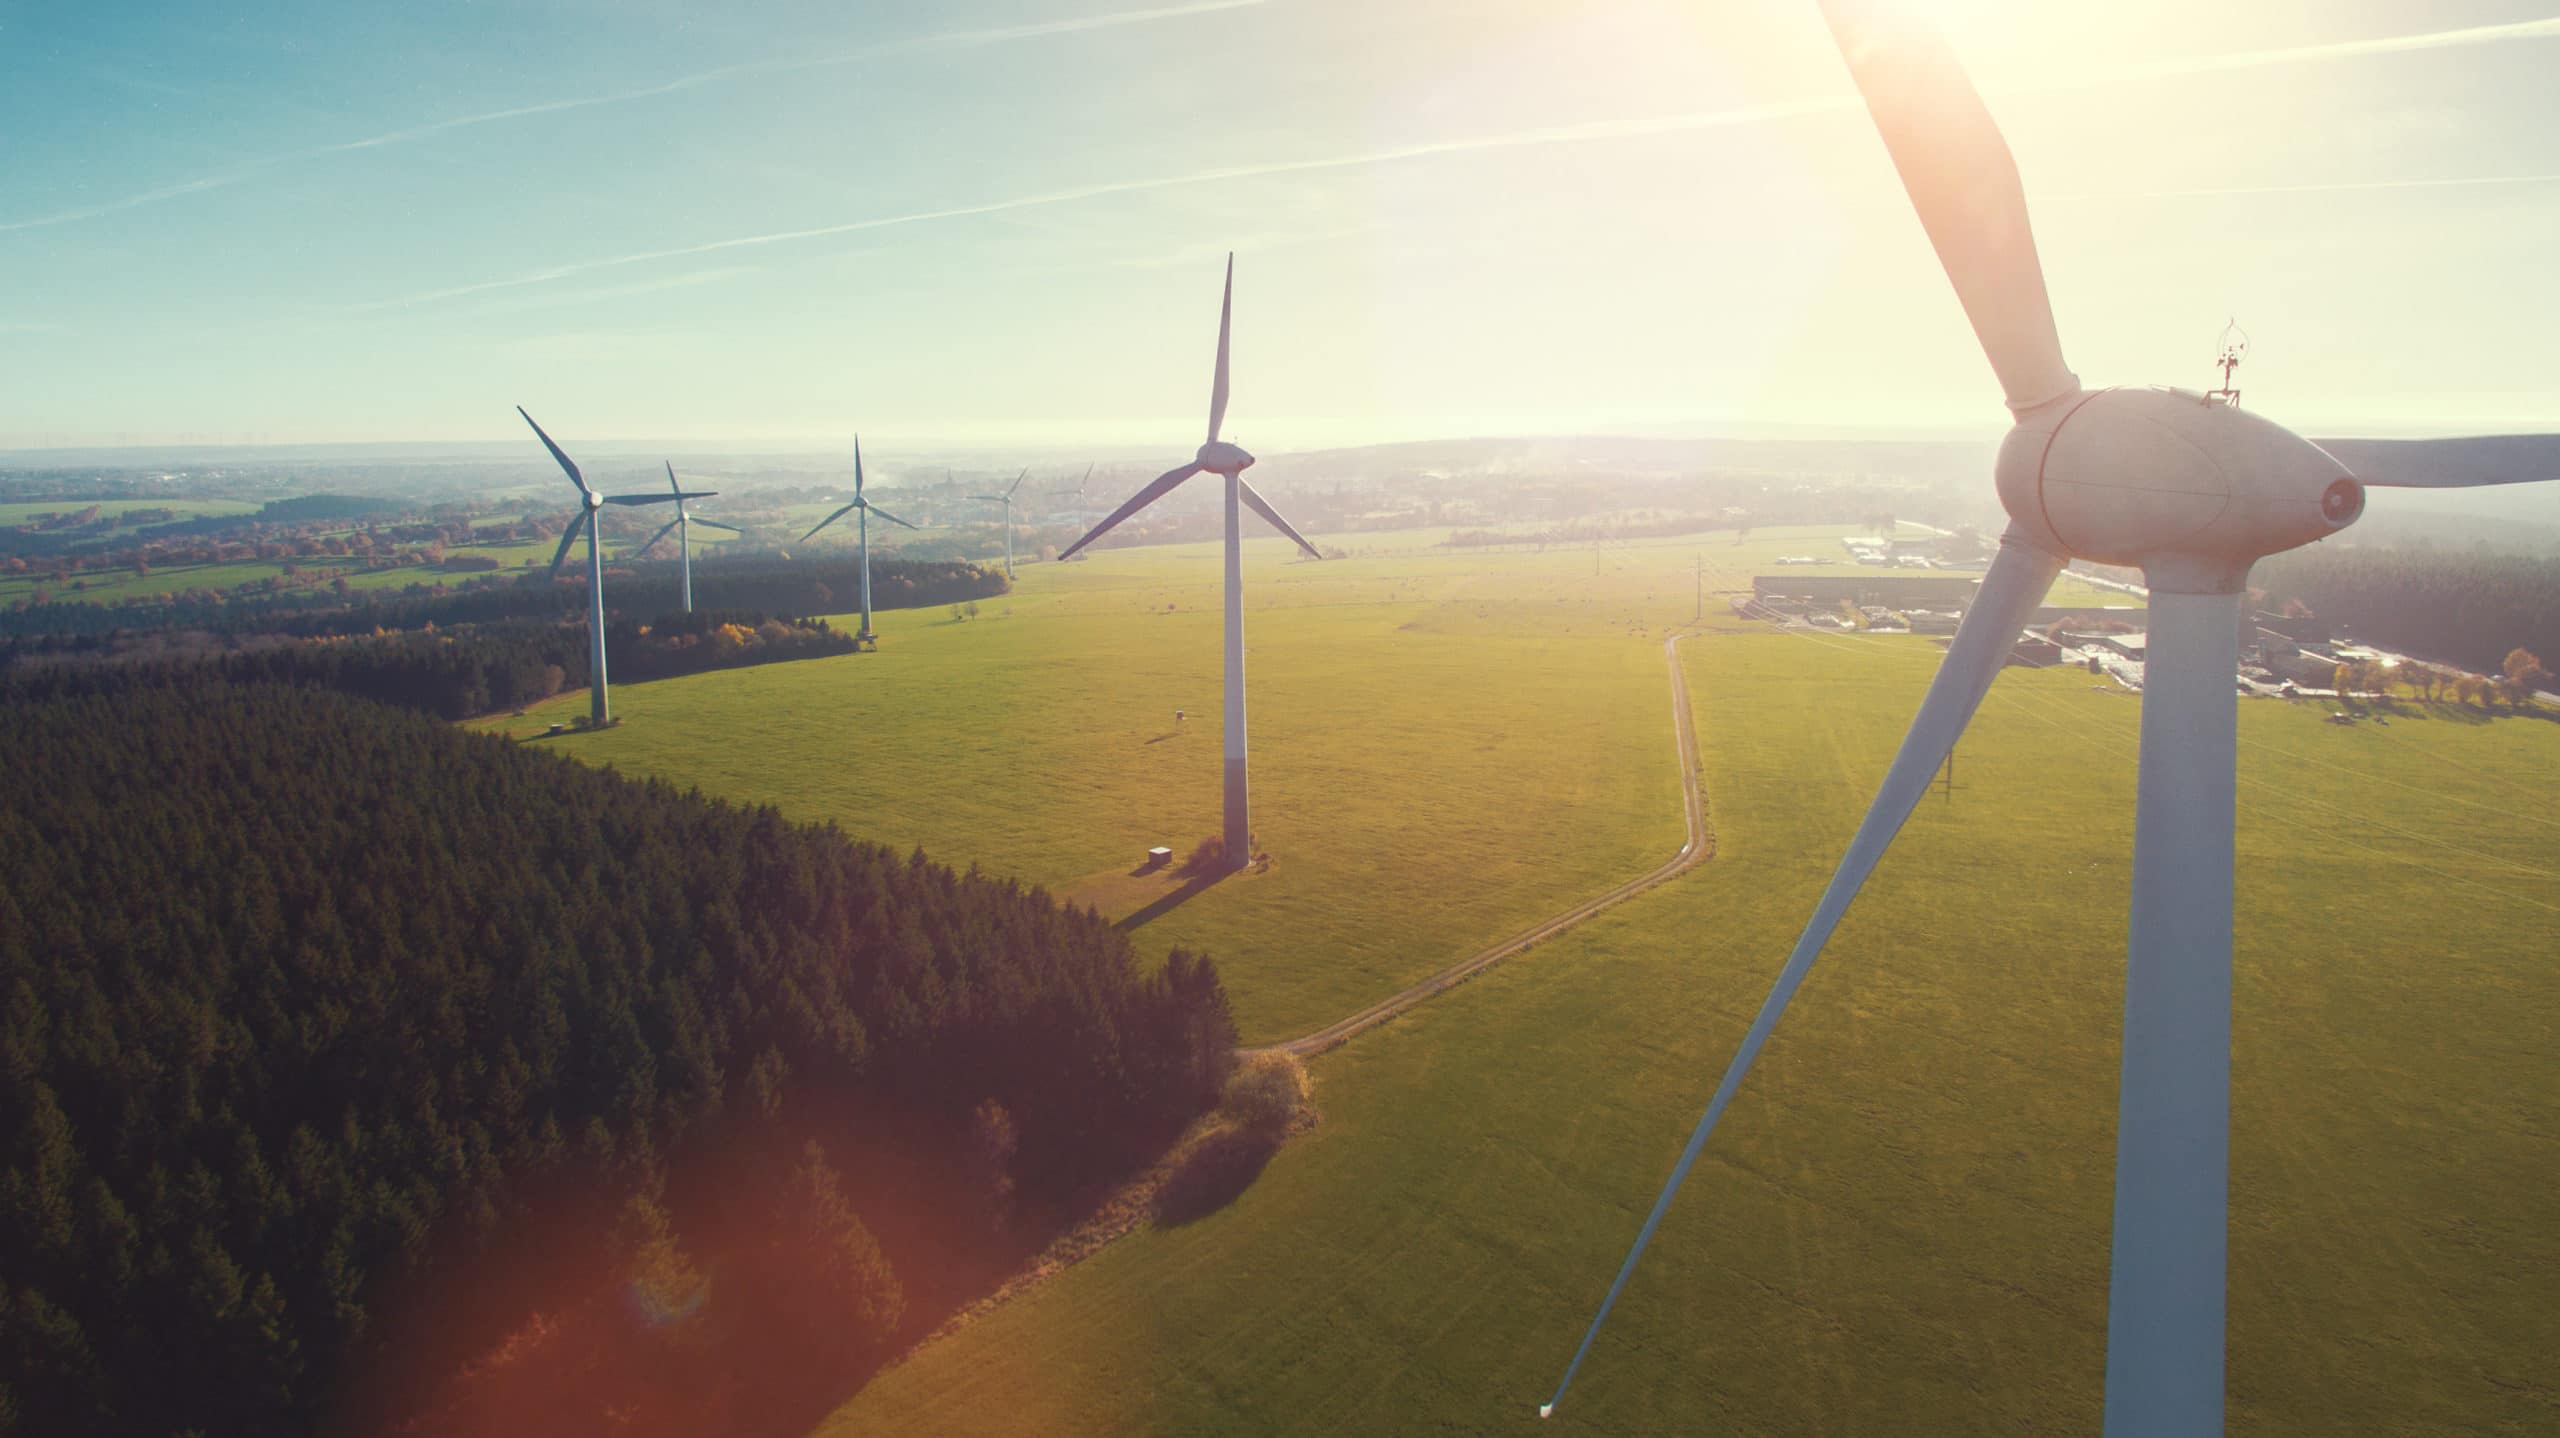 Blair Fox goes live with 5G-ready connectivity for wind farms